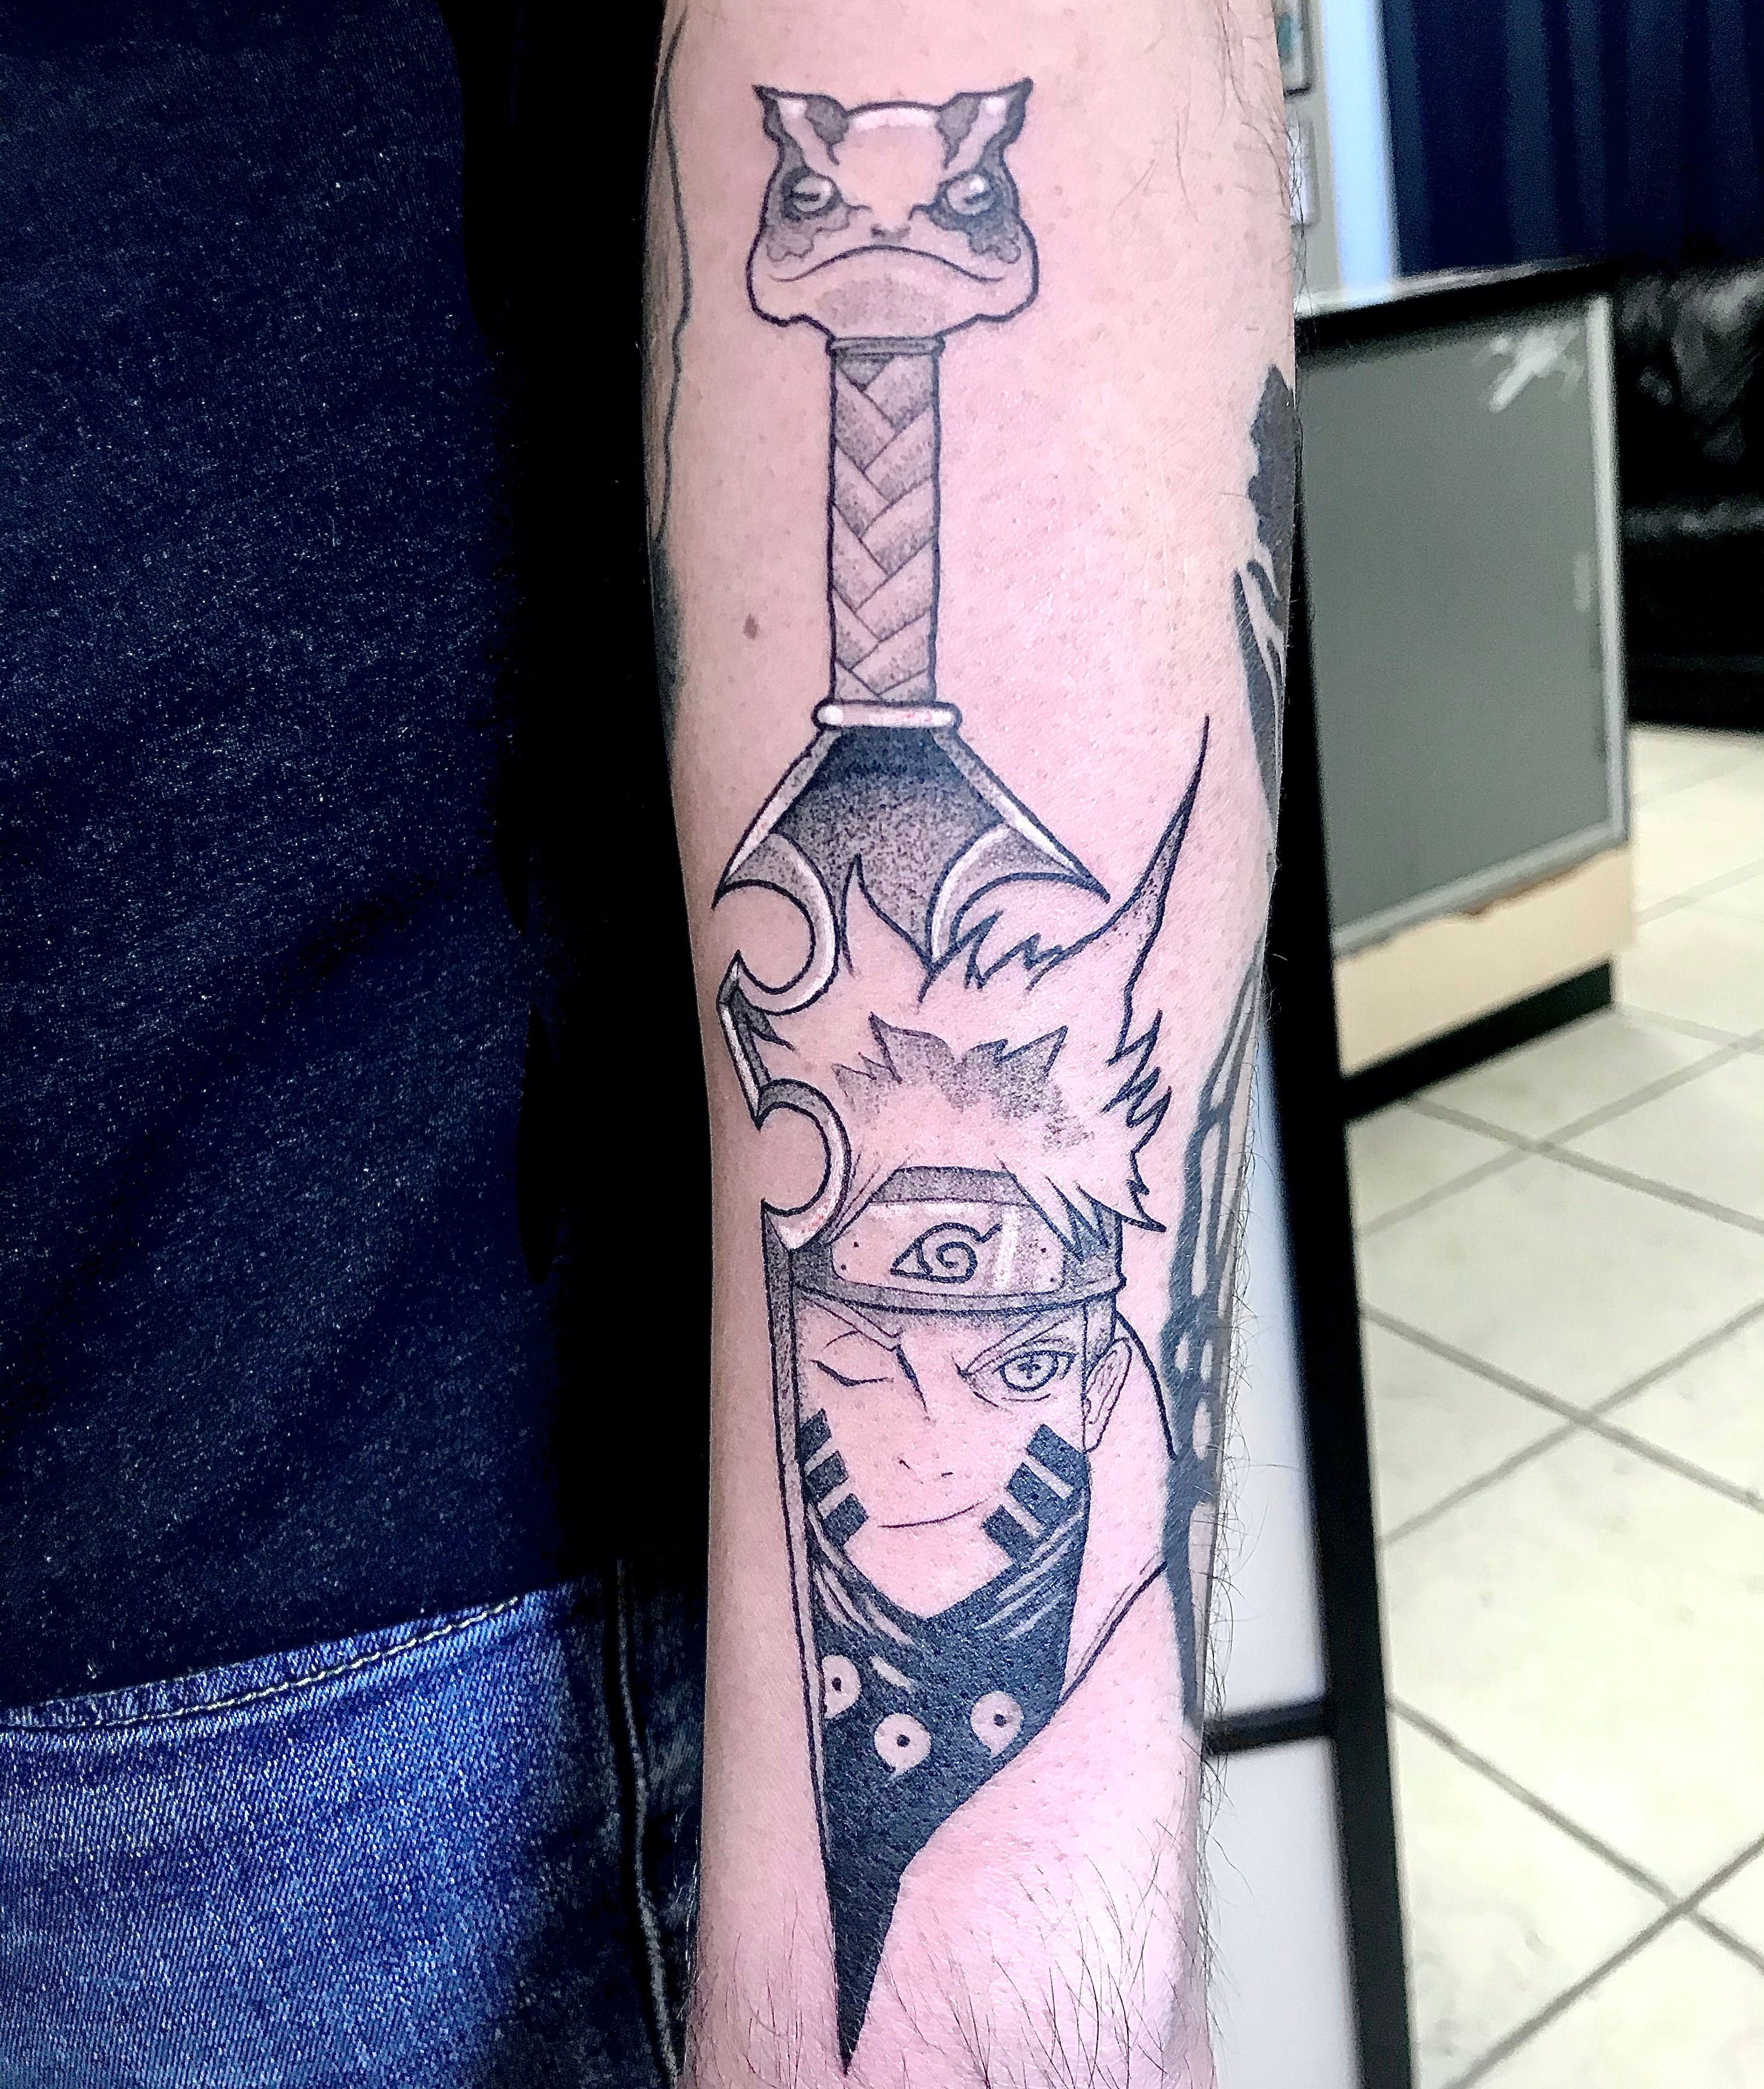 Naruto Kunai traditonal tattoo done recently message me bofthedead for  any anime tattoos anime animetattoo tattoo tattoos  Brian Easlon  bofthedead on Instagram